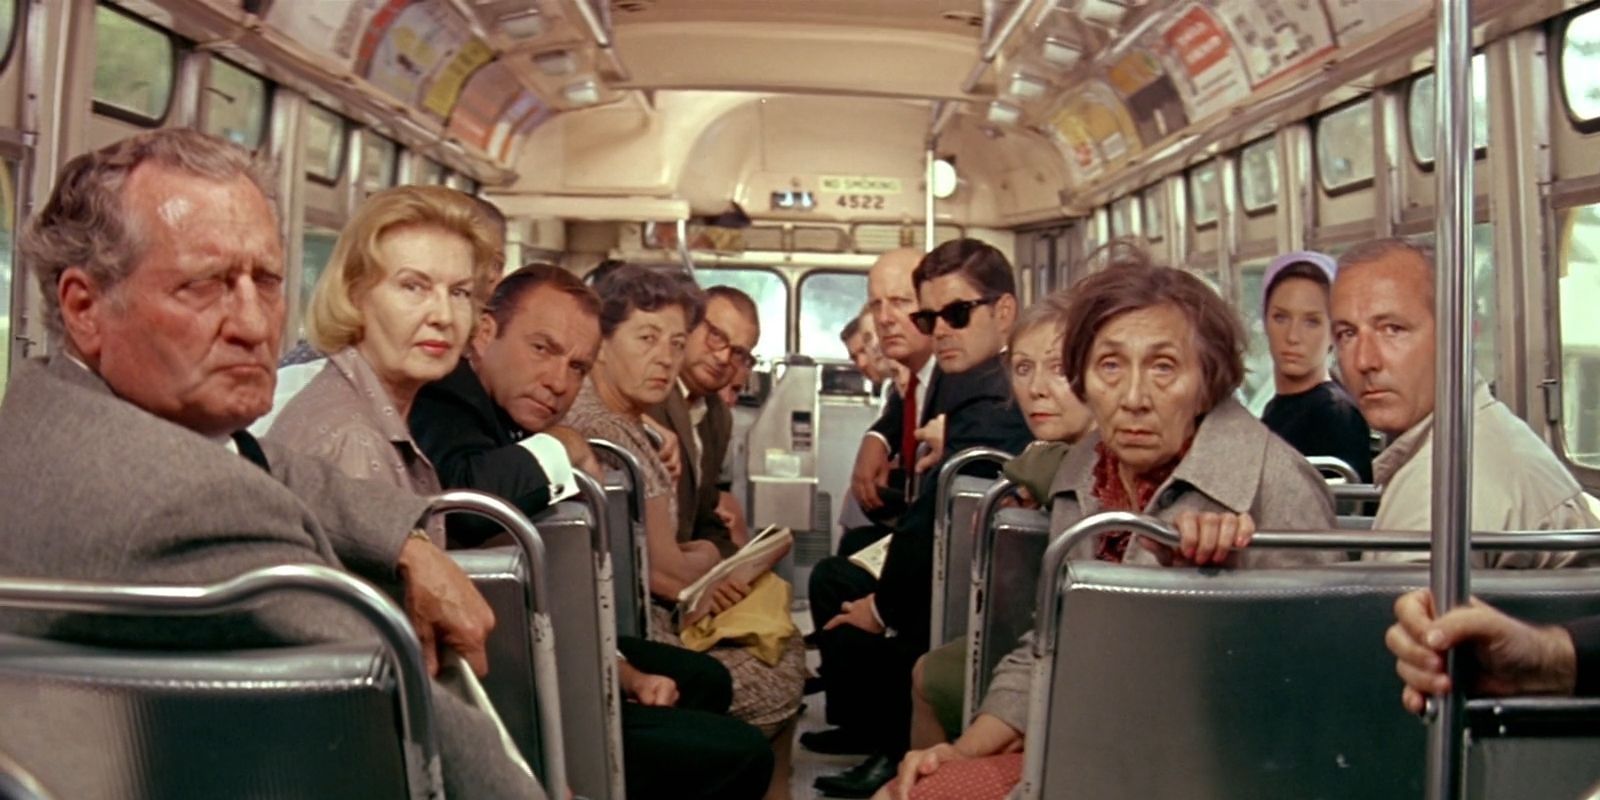 The_bus_passengers_in_The_Graduate